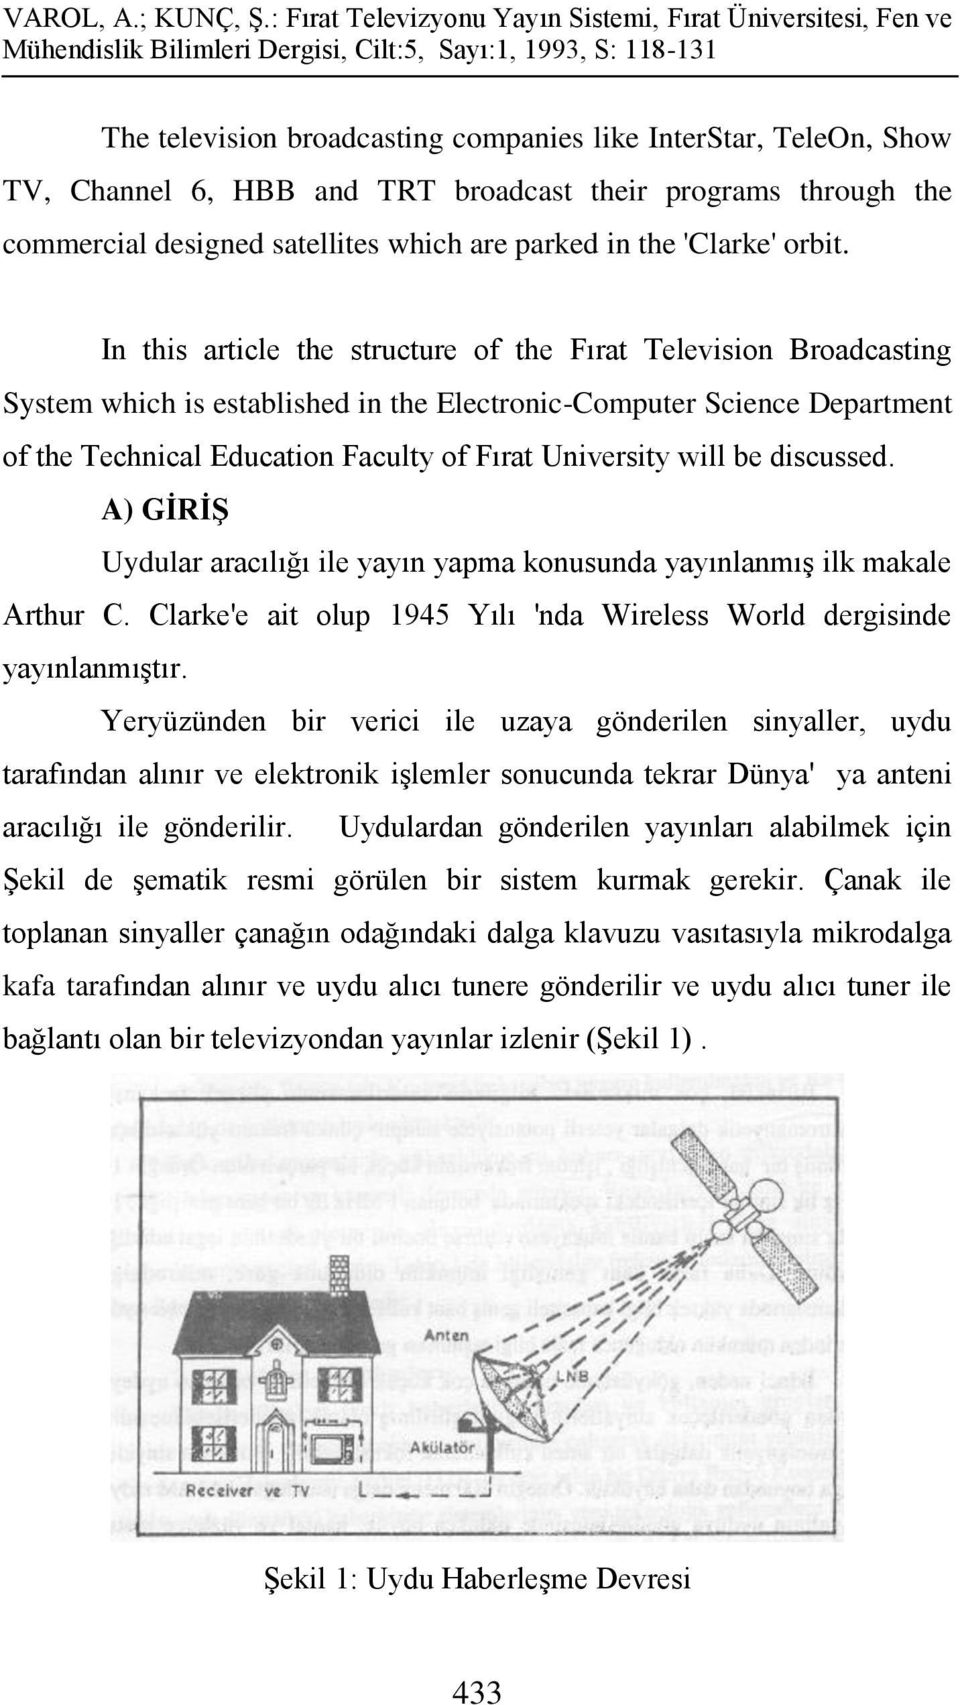 In this article the structure of the Fırat Television Broadcasting System which is established in the Electronic-Computer Science Department of the Technical Education Faculty of Fırat University